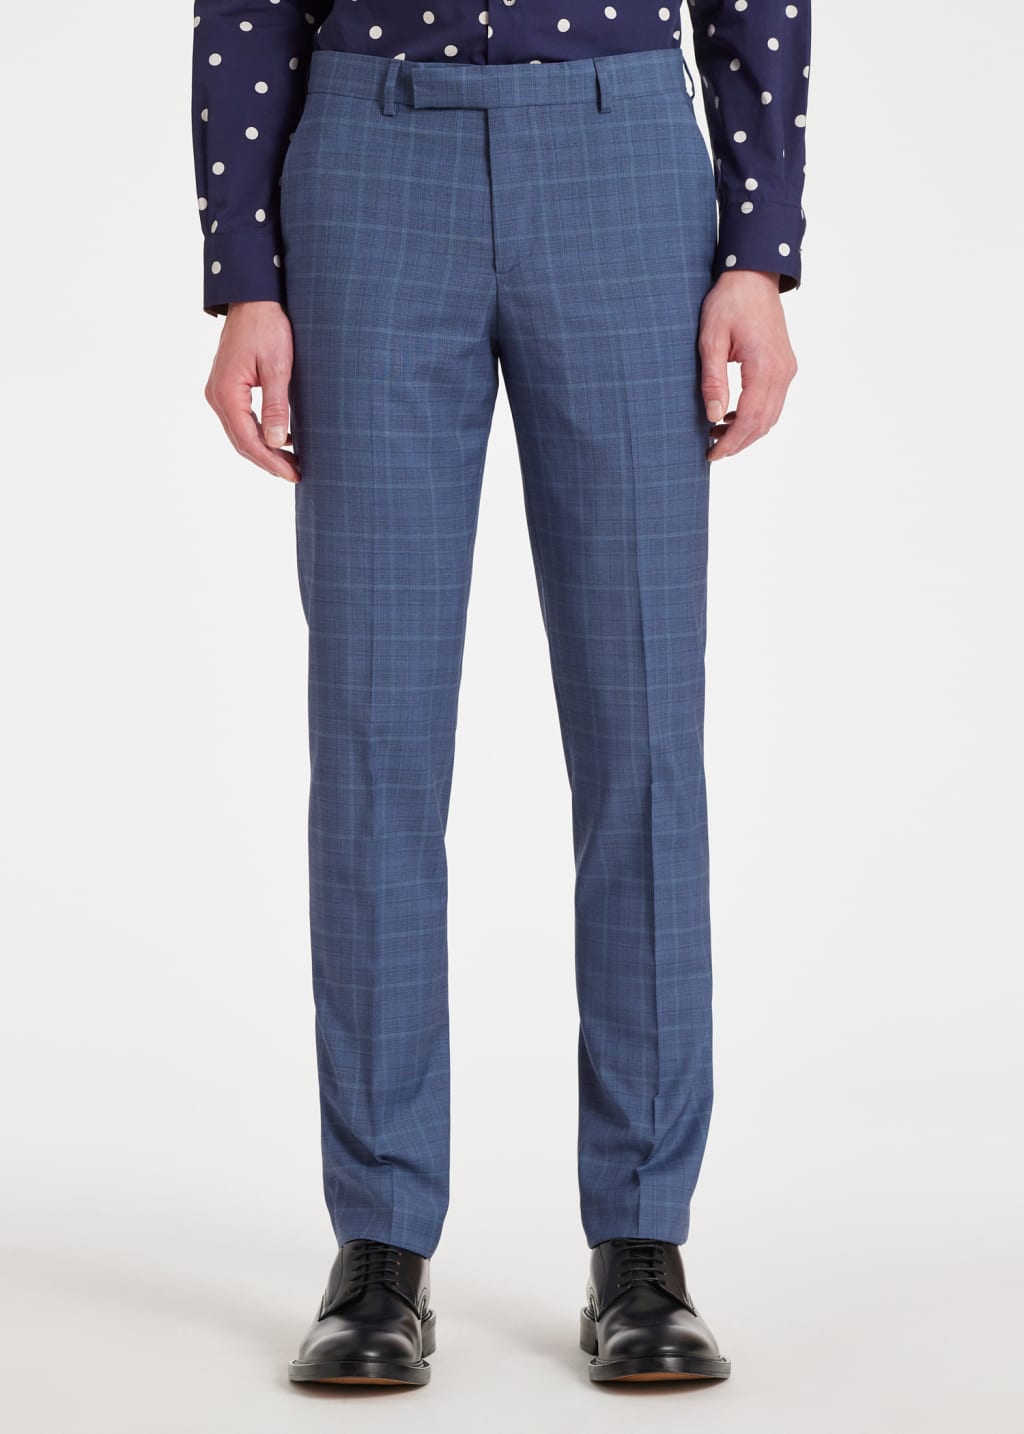 Model View - The Soho - Tailored-Fit Blue Check Wool Suit Paul Smith